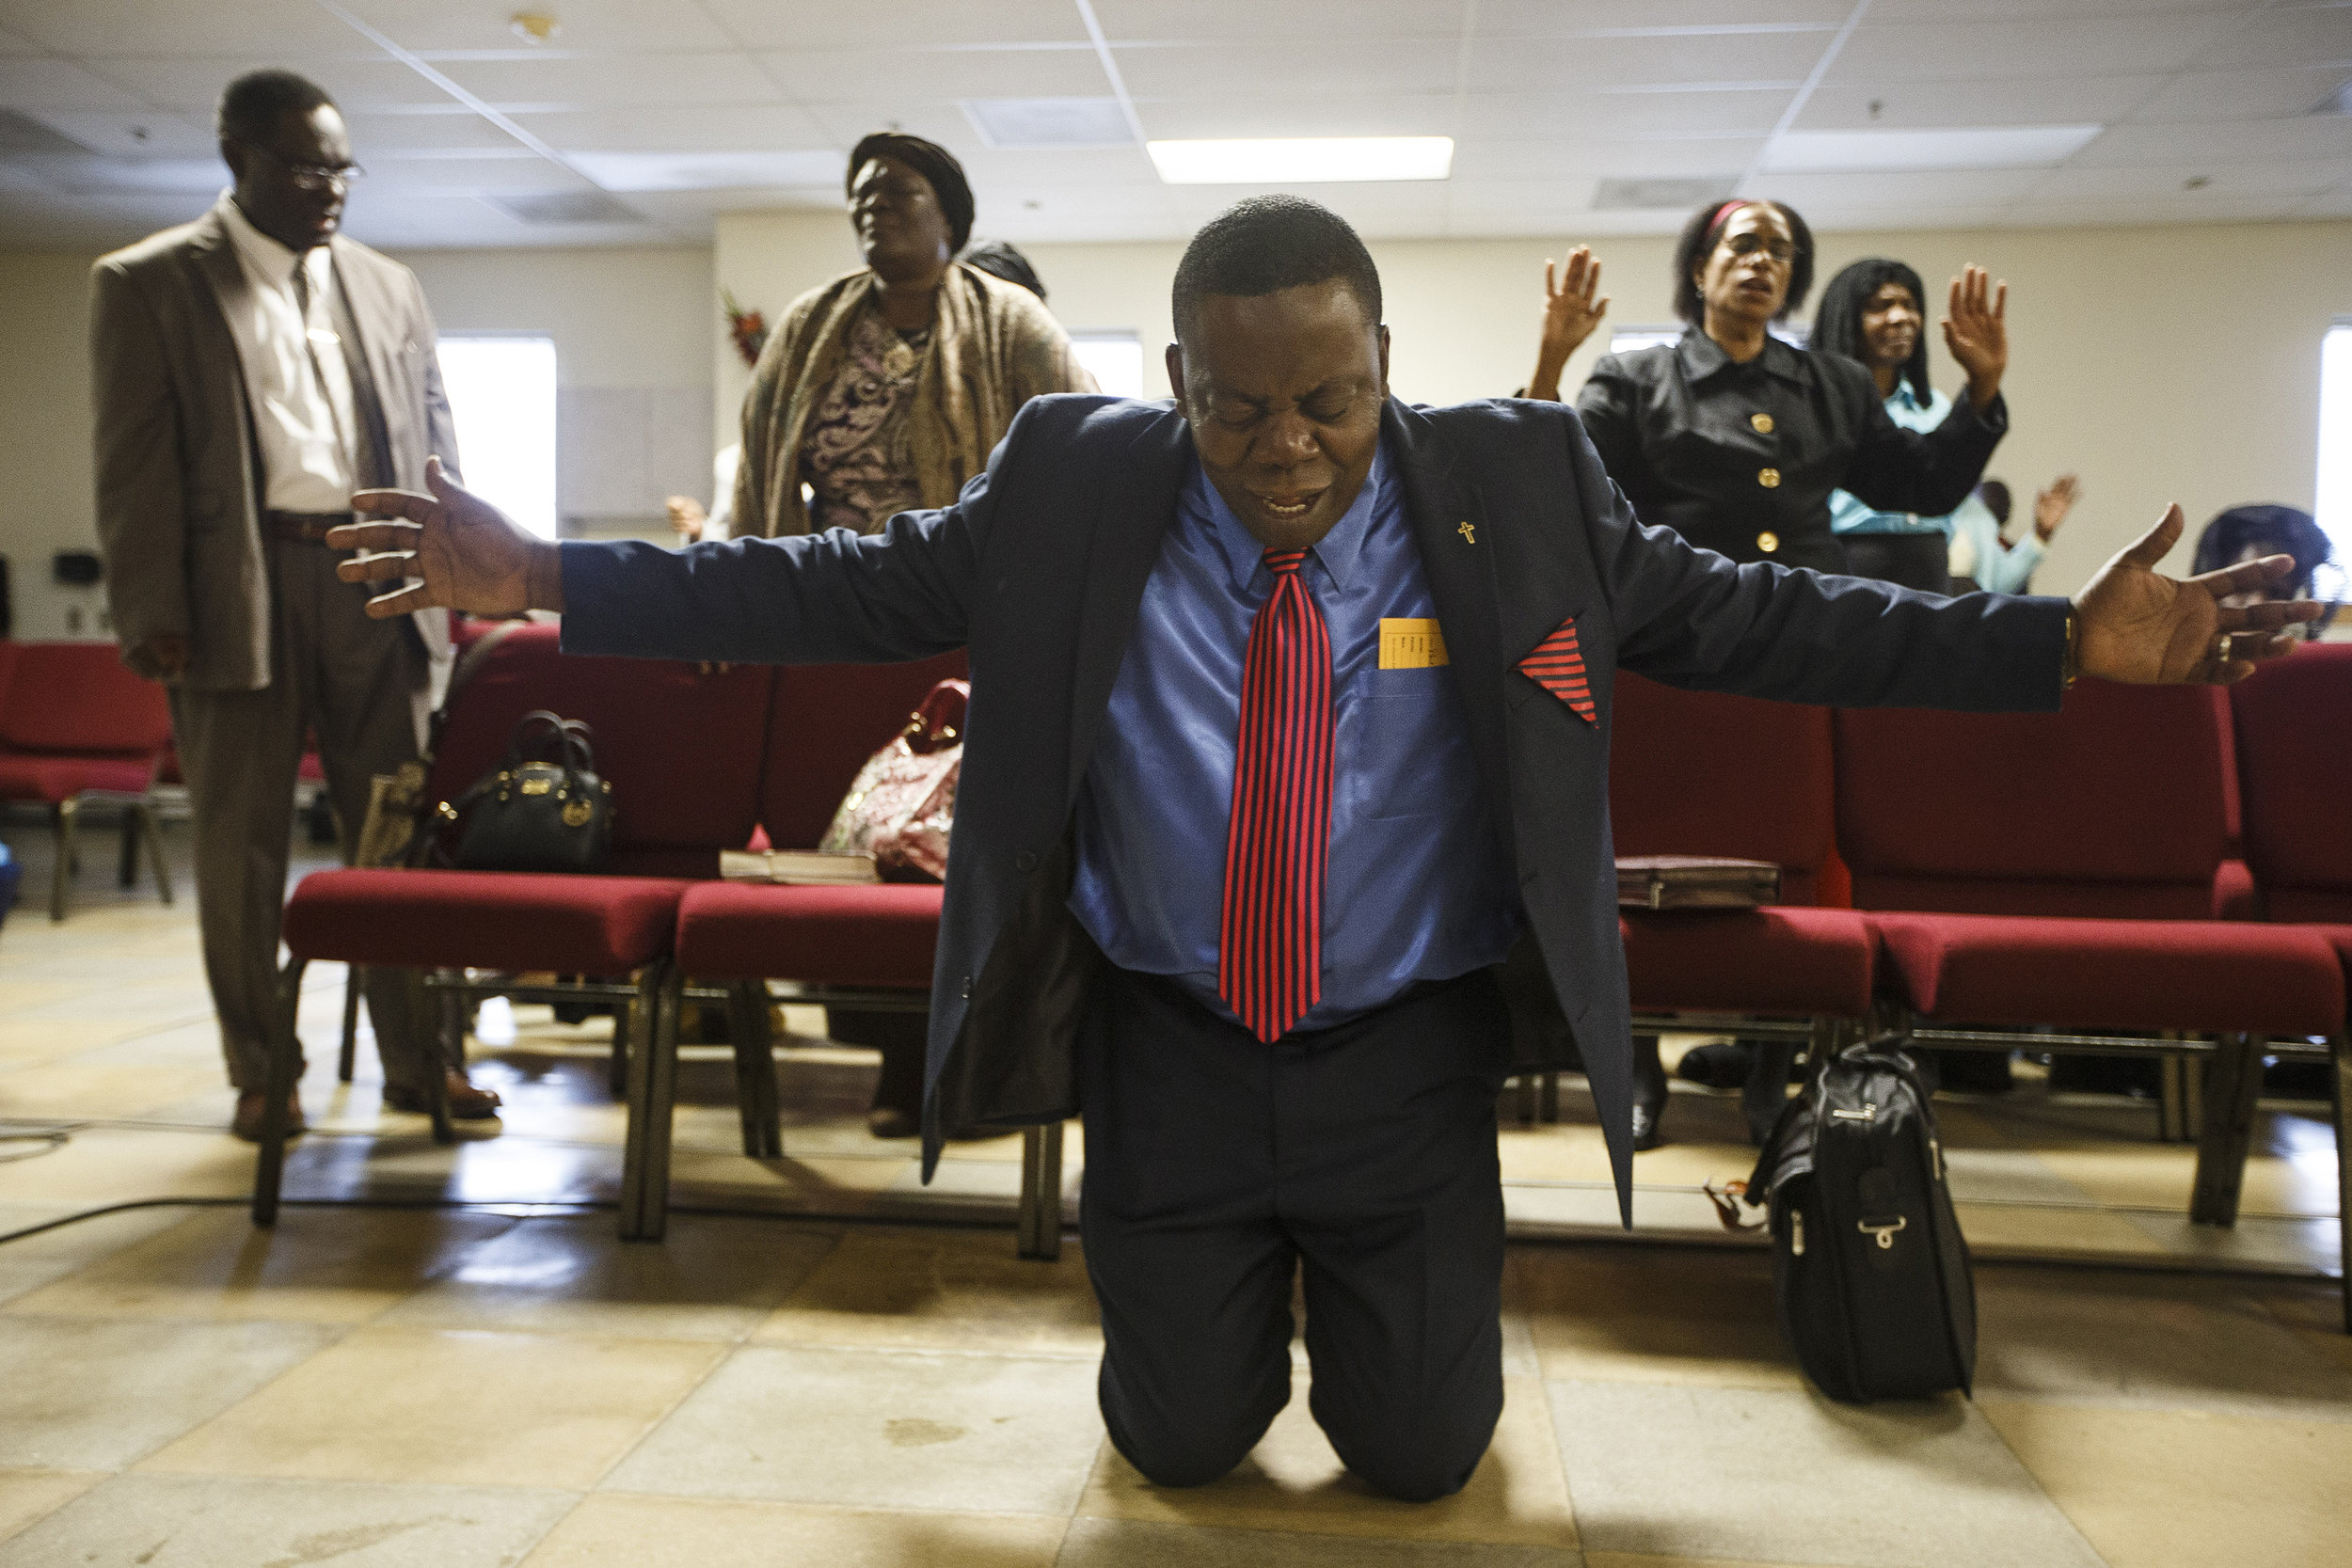  Pastor Jean Jeune leads congregants prays for hurricane victims during service at the First Christian Church Source of Grace, a church frequented by the Haitian community, in Boston, MA, October 9, 2016. &nbsp; &nbsp;Several members of the church ha